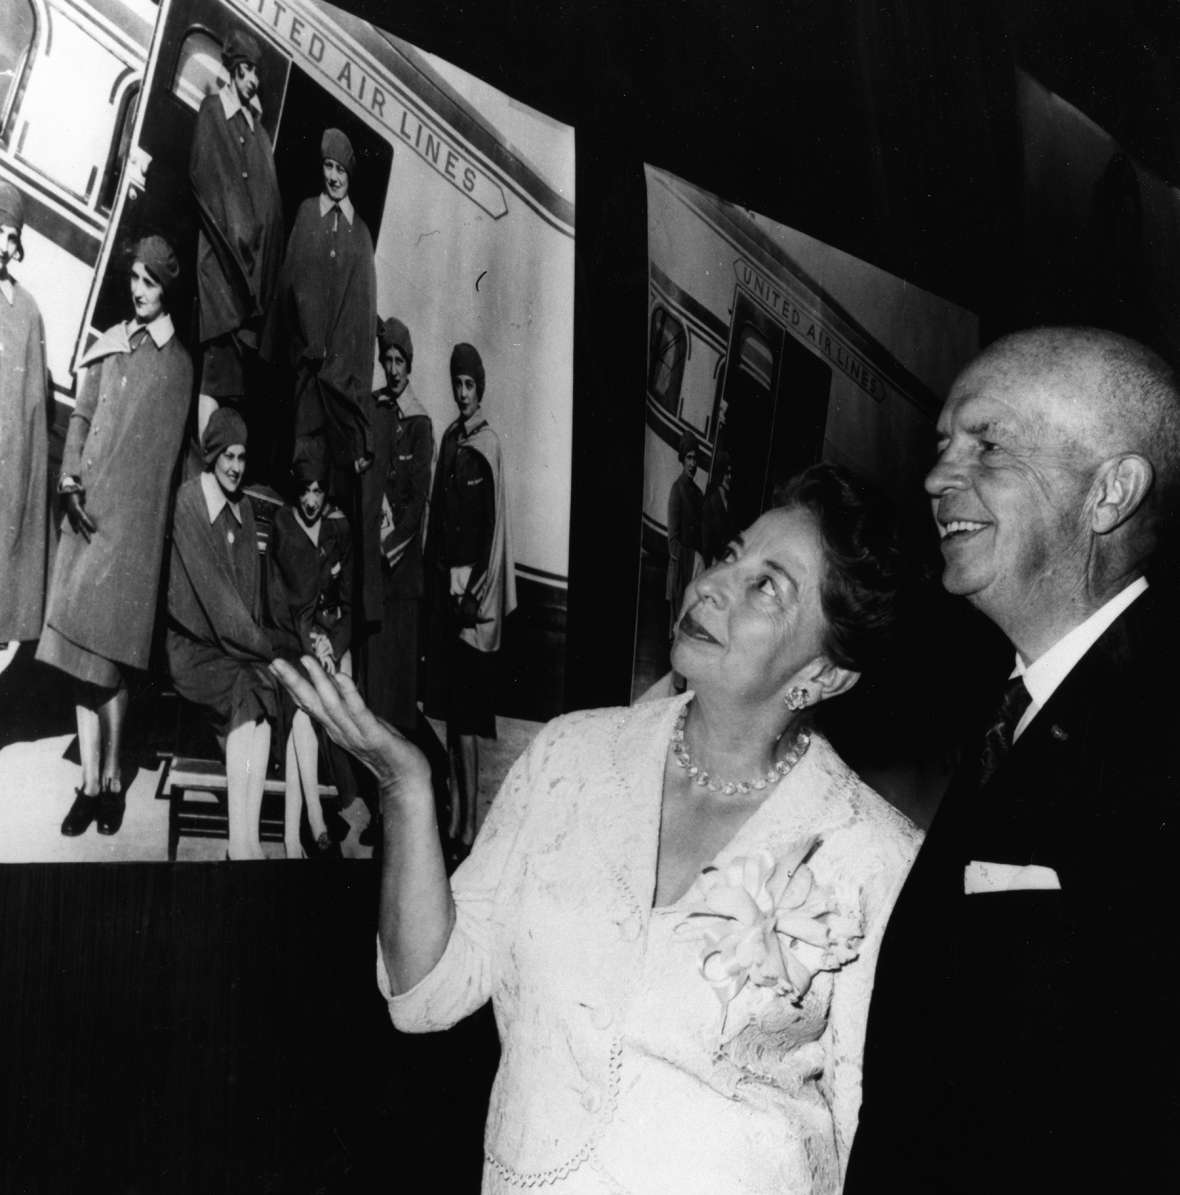 At the 30th anniversary of the United Air Lines stewardess service, Ellen Church and Steve Stimpson, the duo who first initiated the idea of hiring stewardesses, admire a photo of the original eight trained at Cheyenne in 1930. United Air Lines Archives.